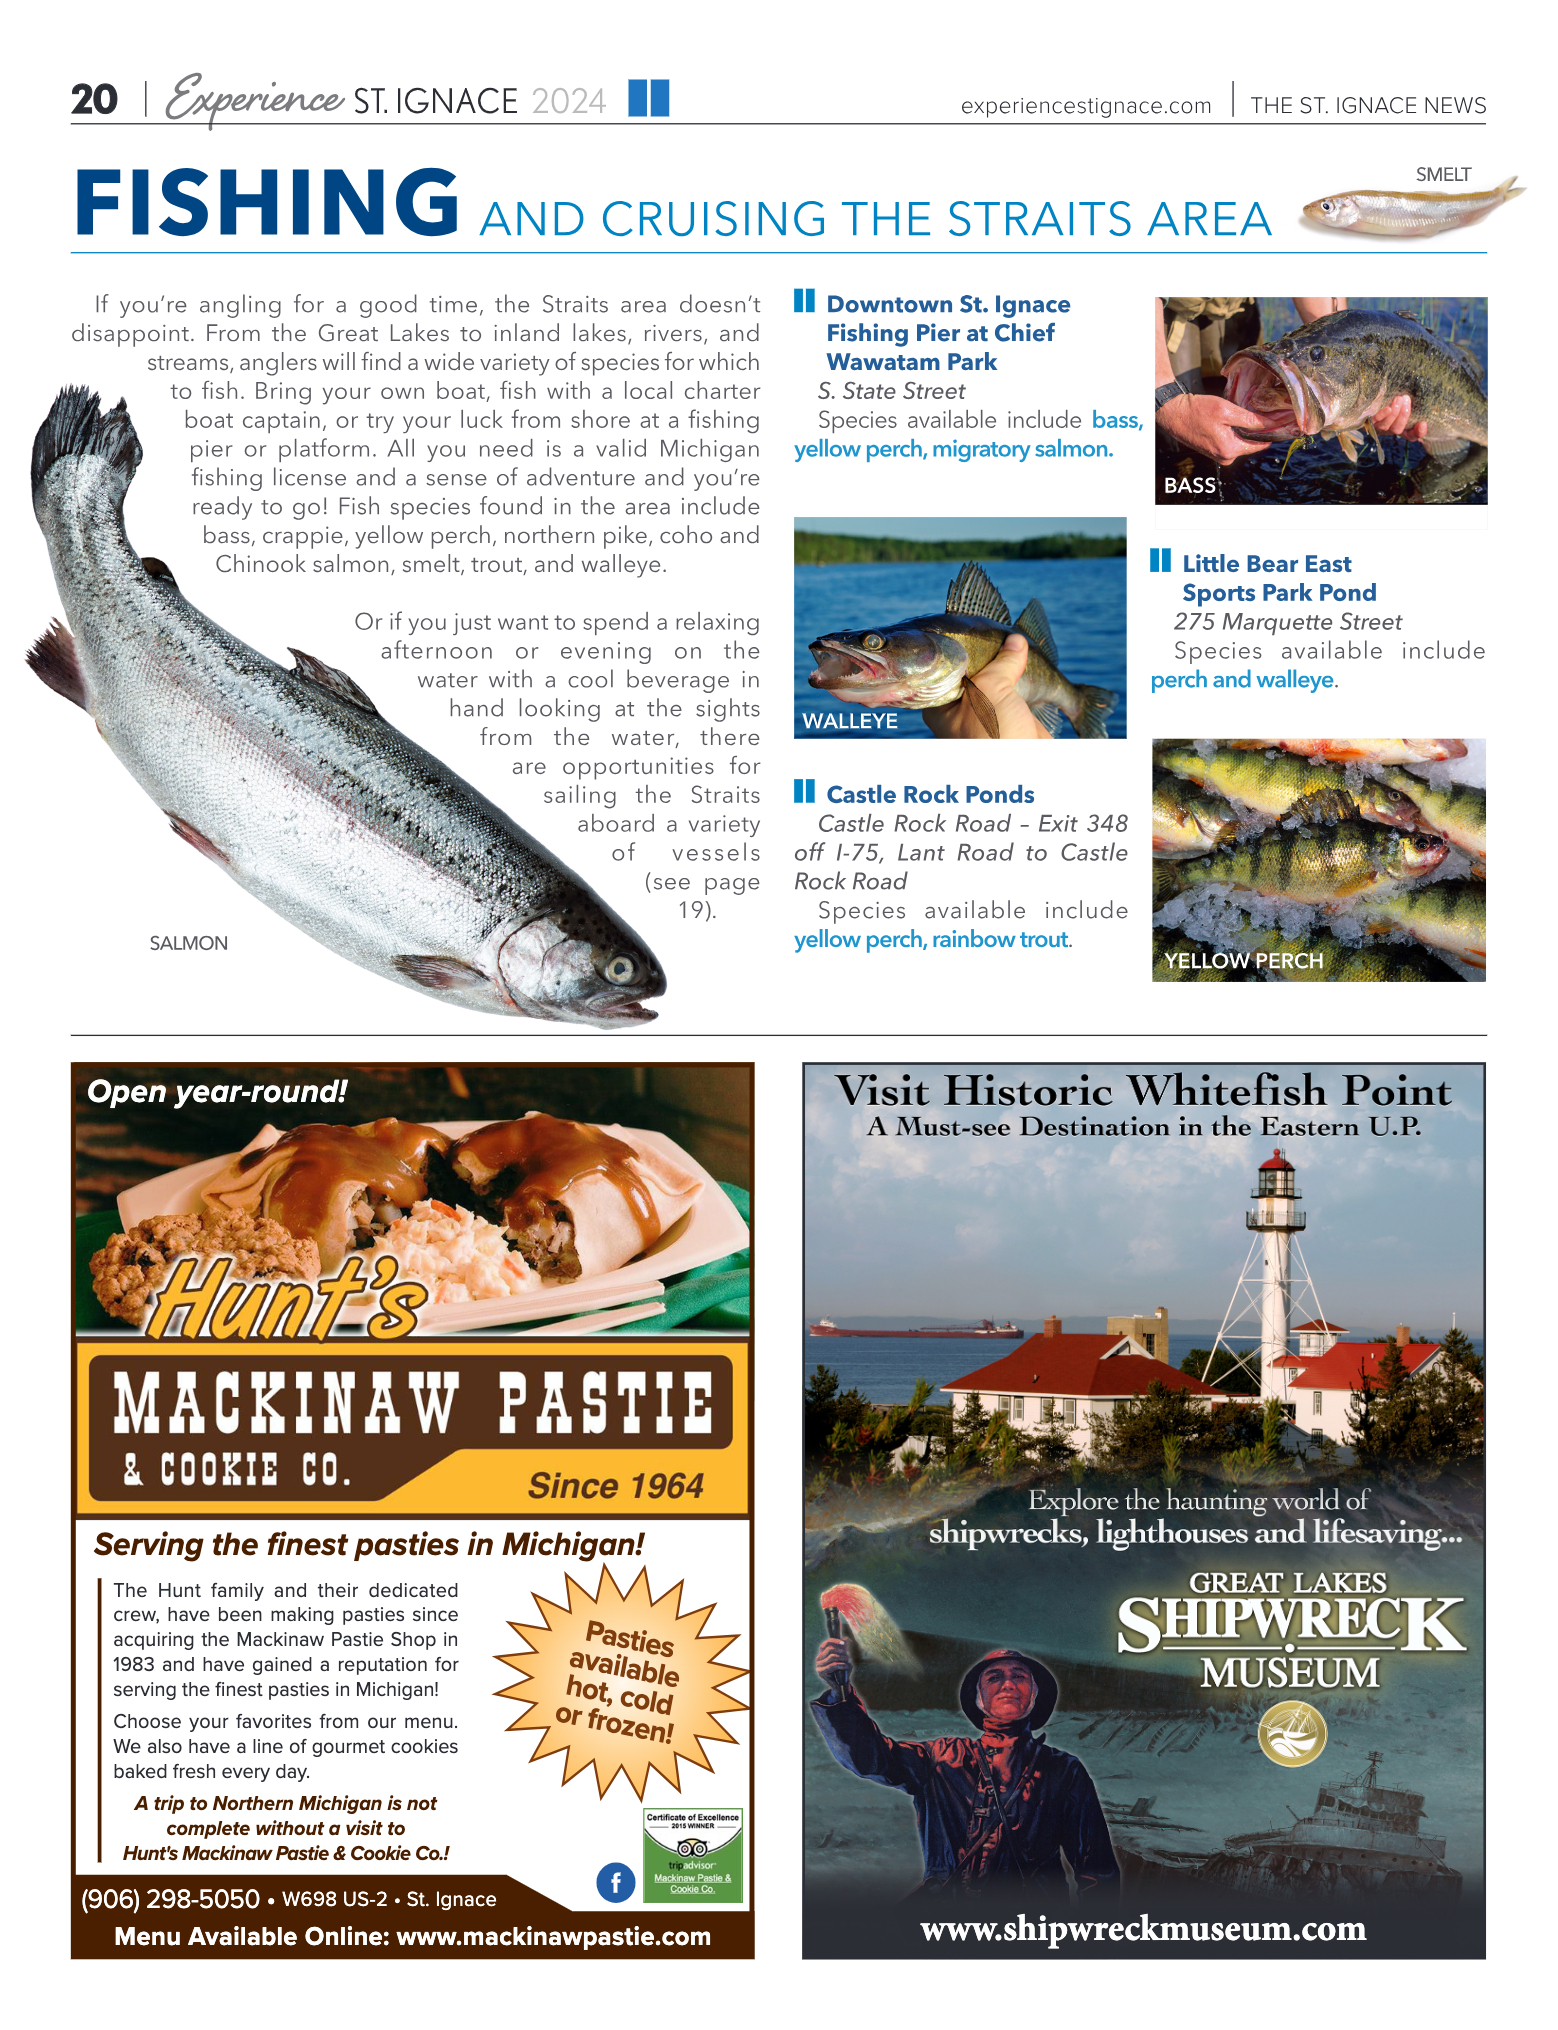 Experience St. Ignace - Guest Travel Guide 2024 - page 20